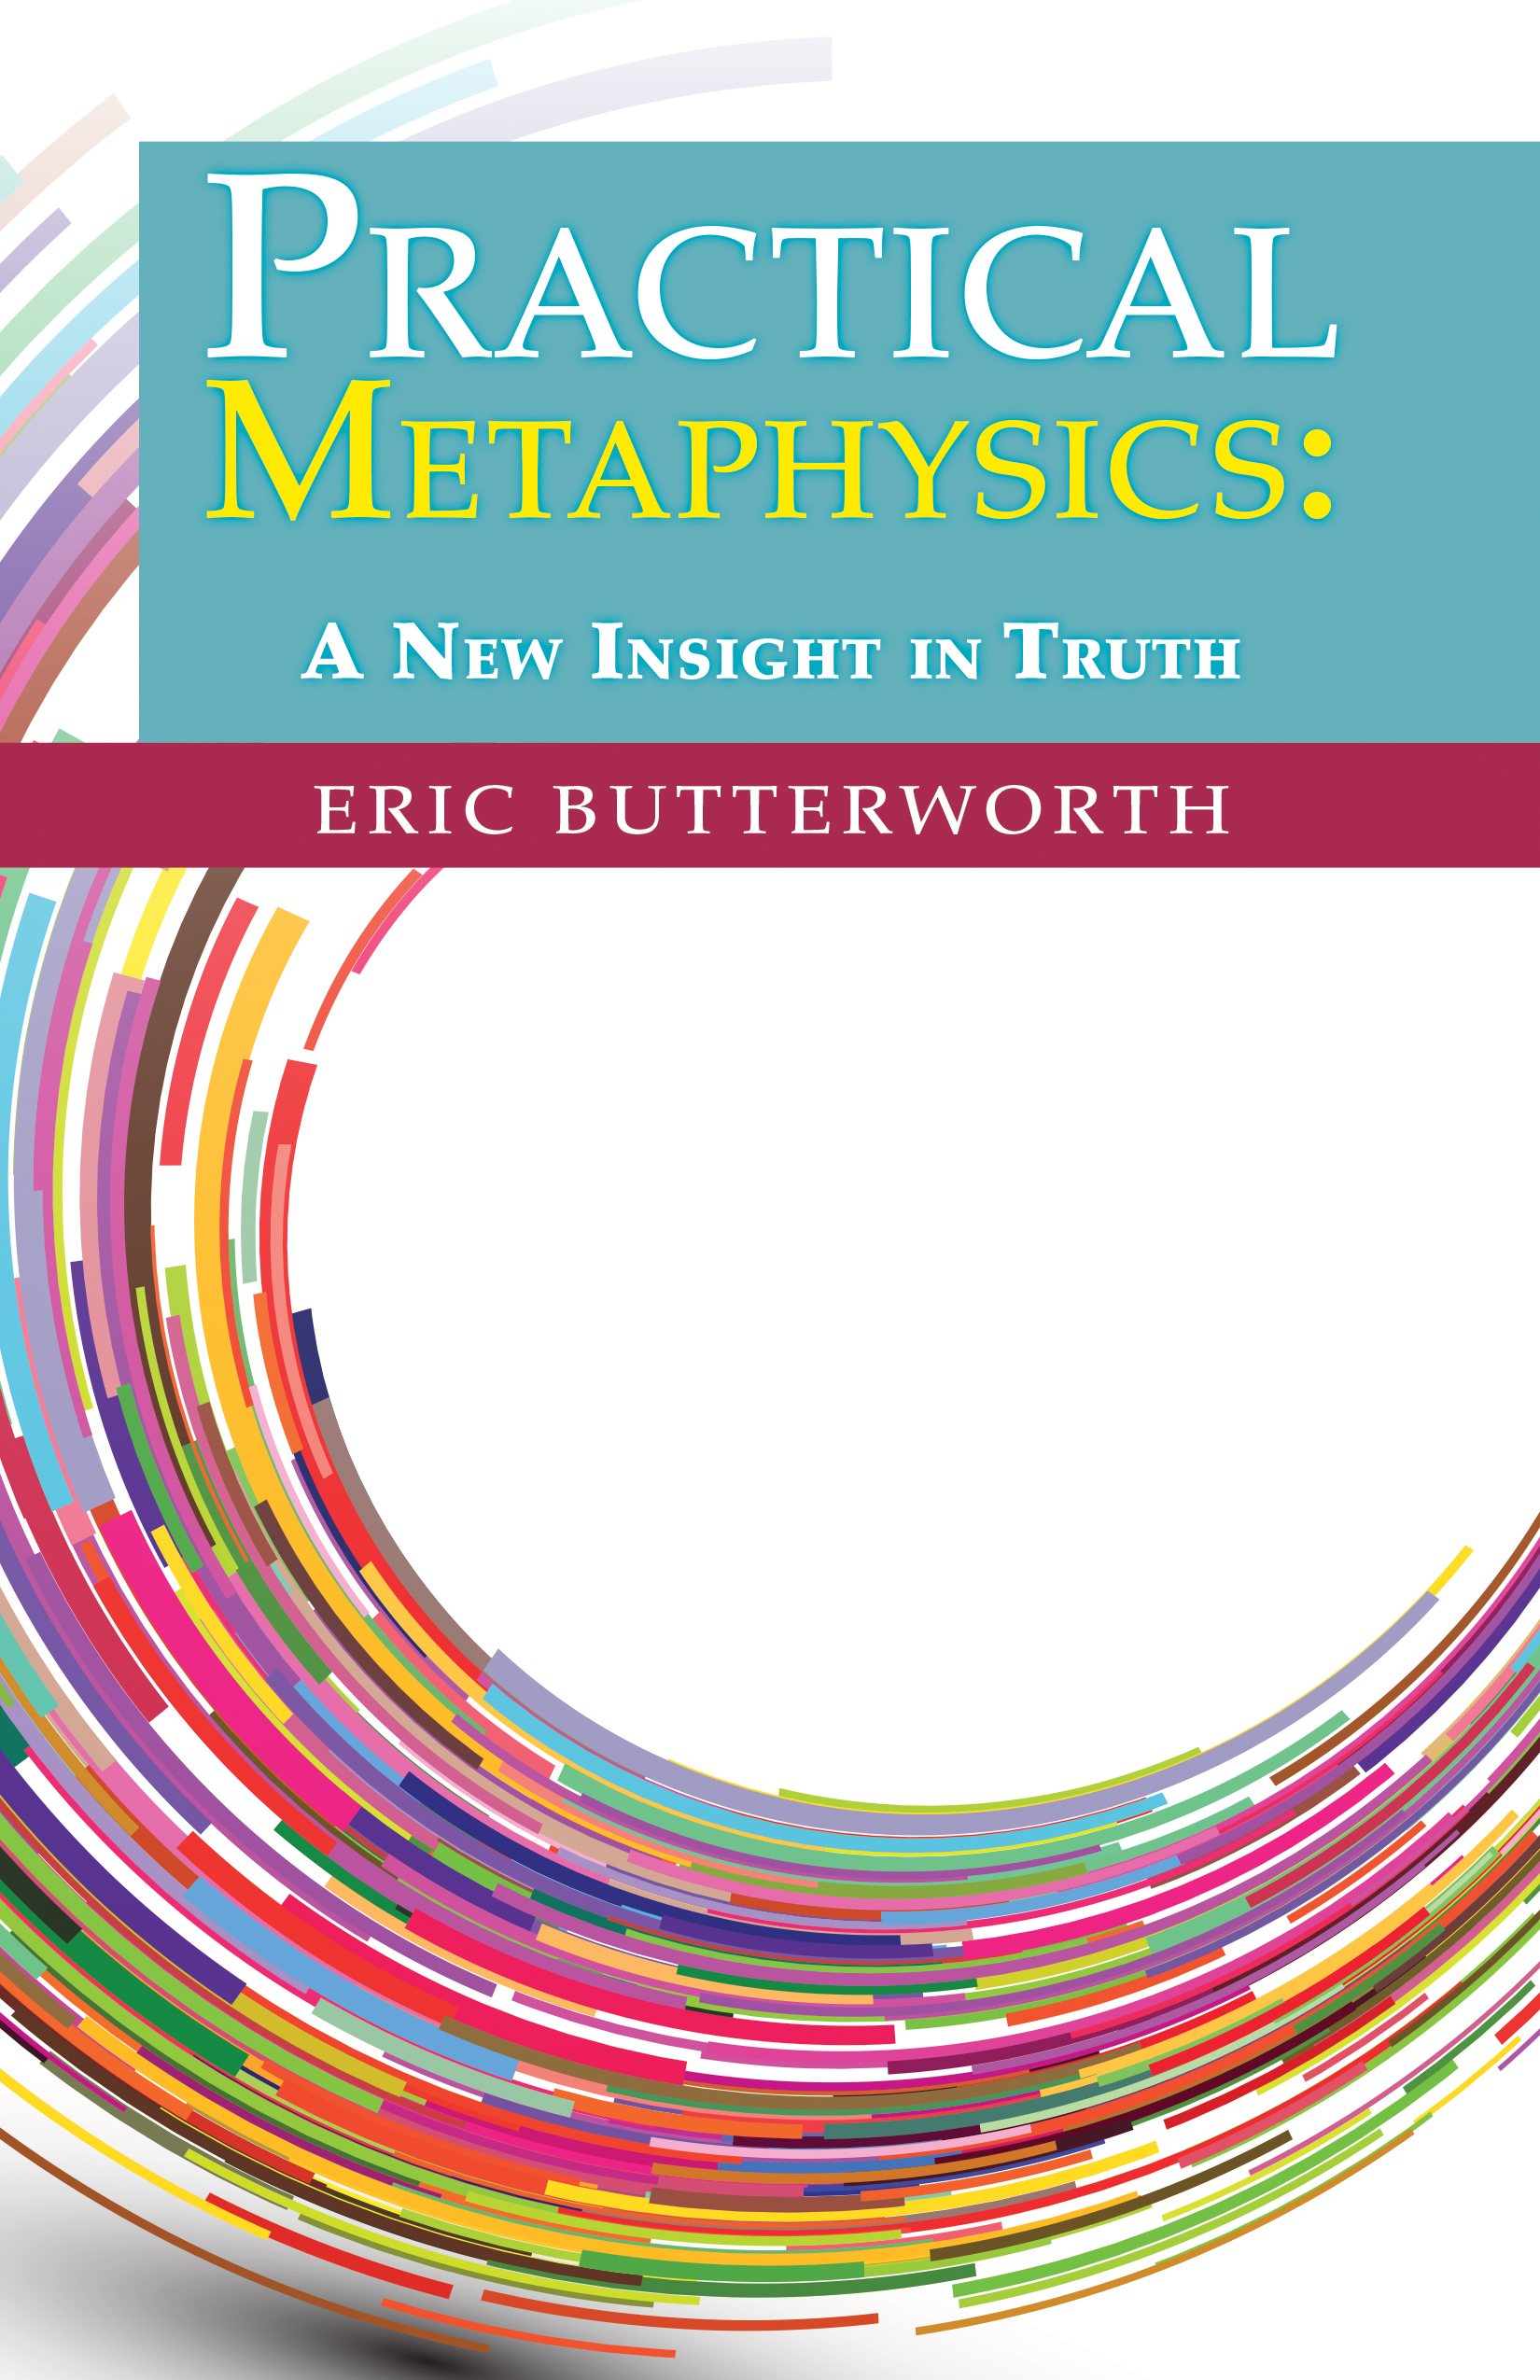 Practical Metaphysics: A New Insight in Truth - e-Book